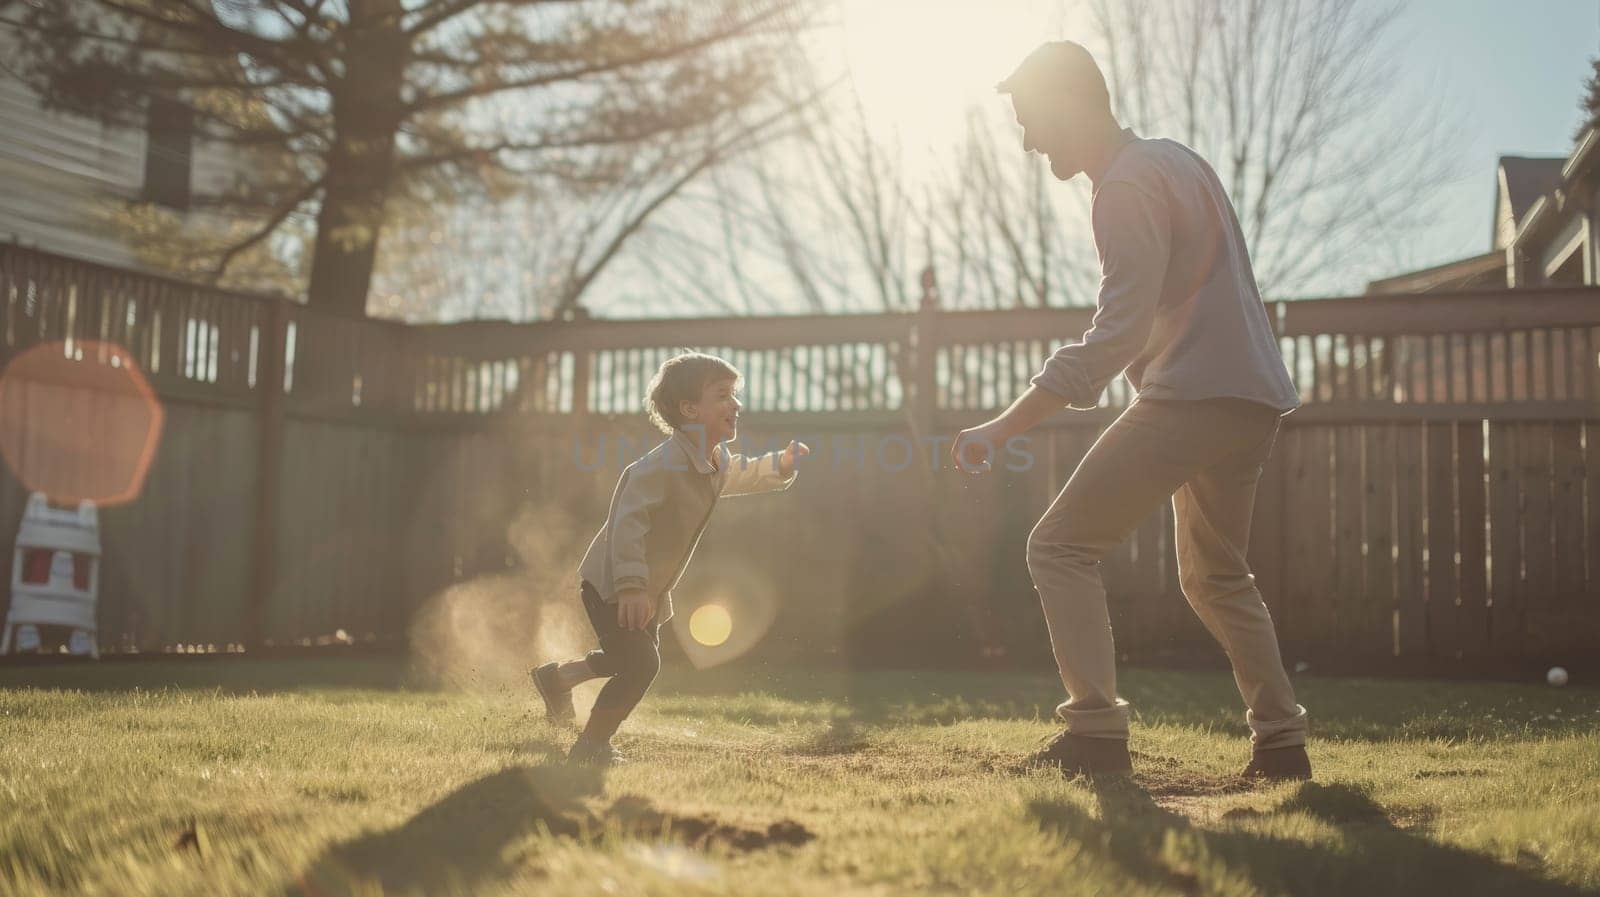 Father and son playing catch with a baseball in backyard at sunset